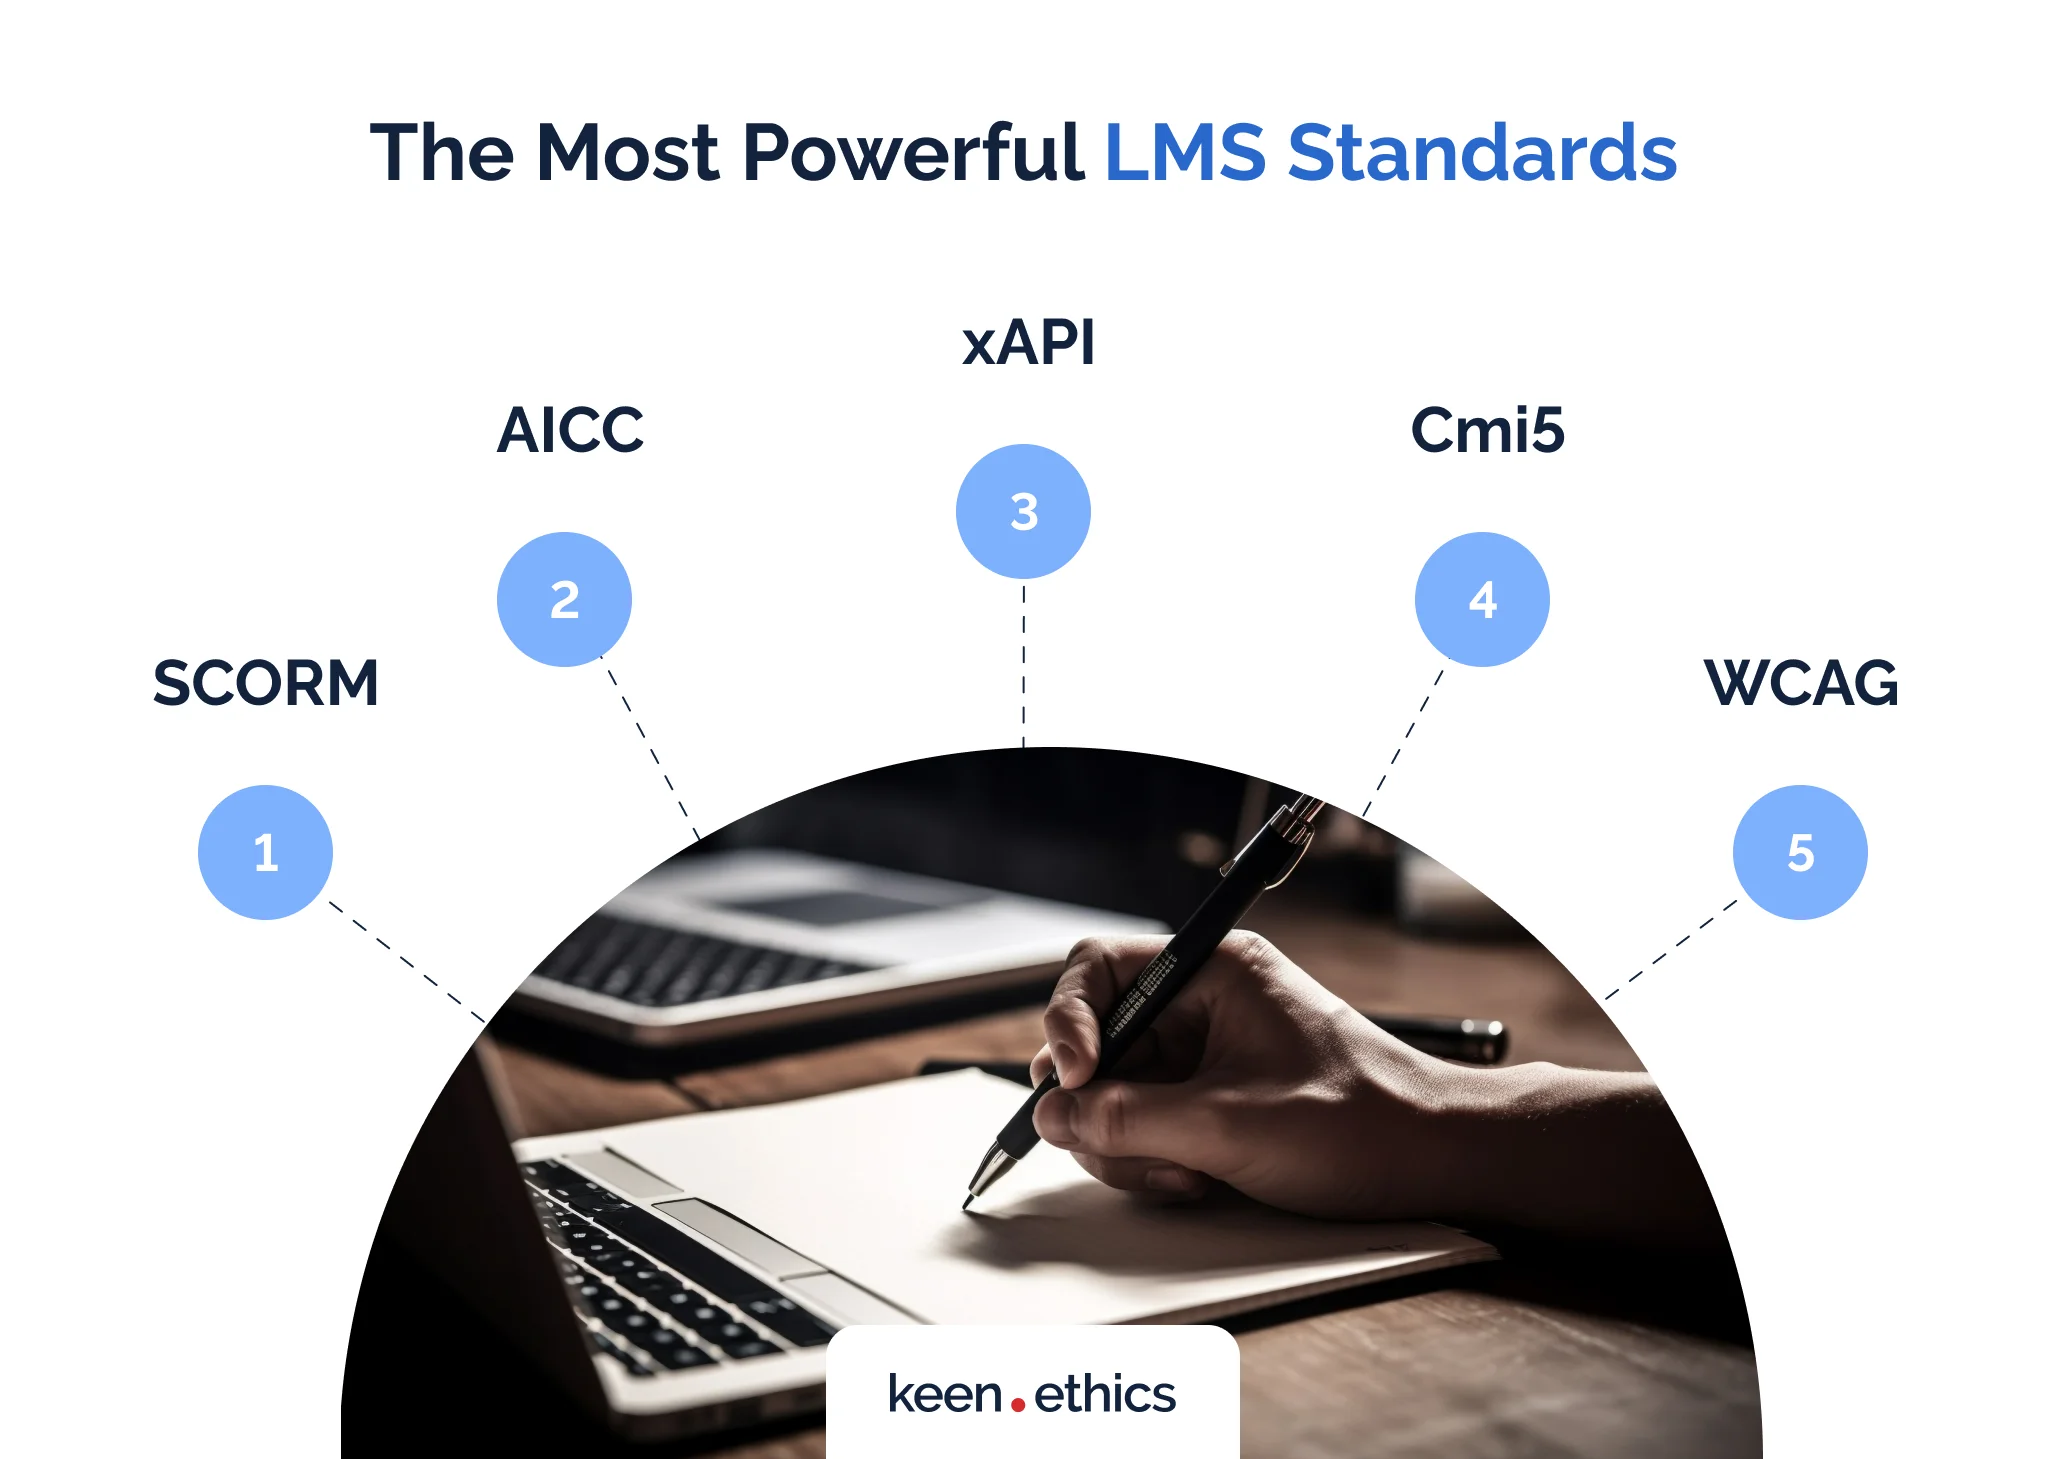 The most powerful LMS standards